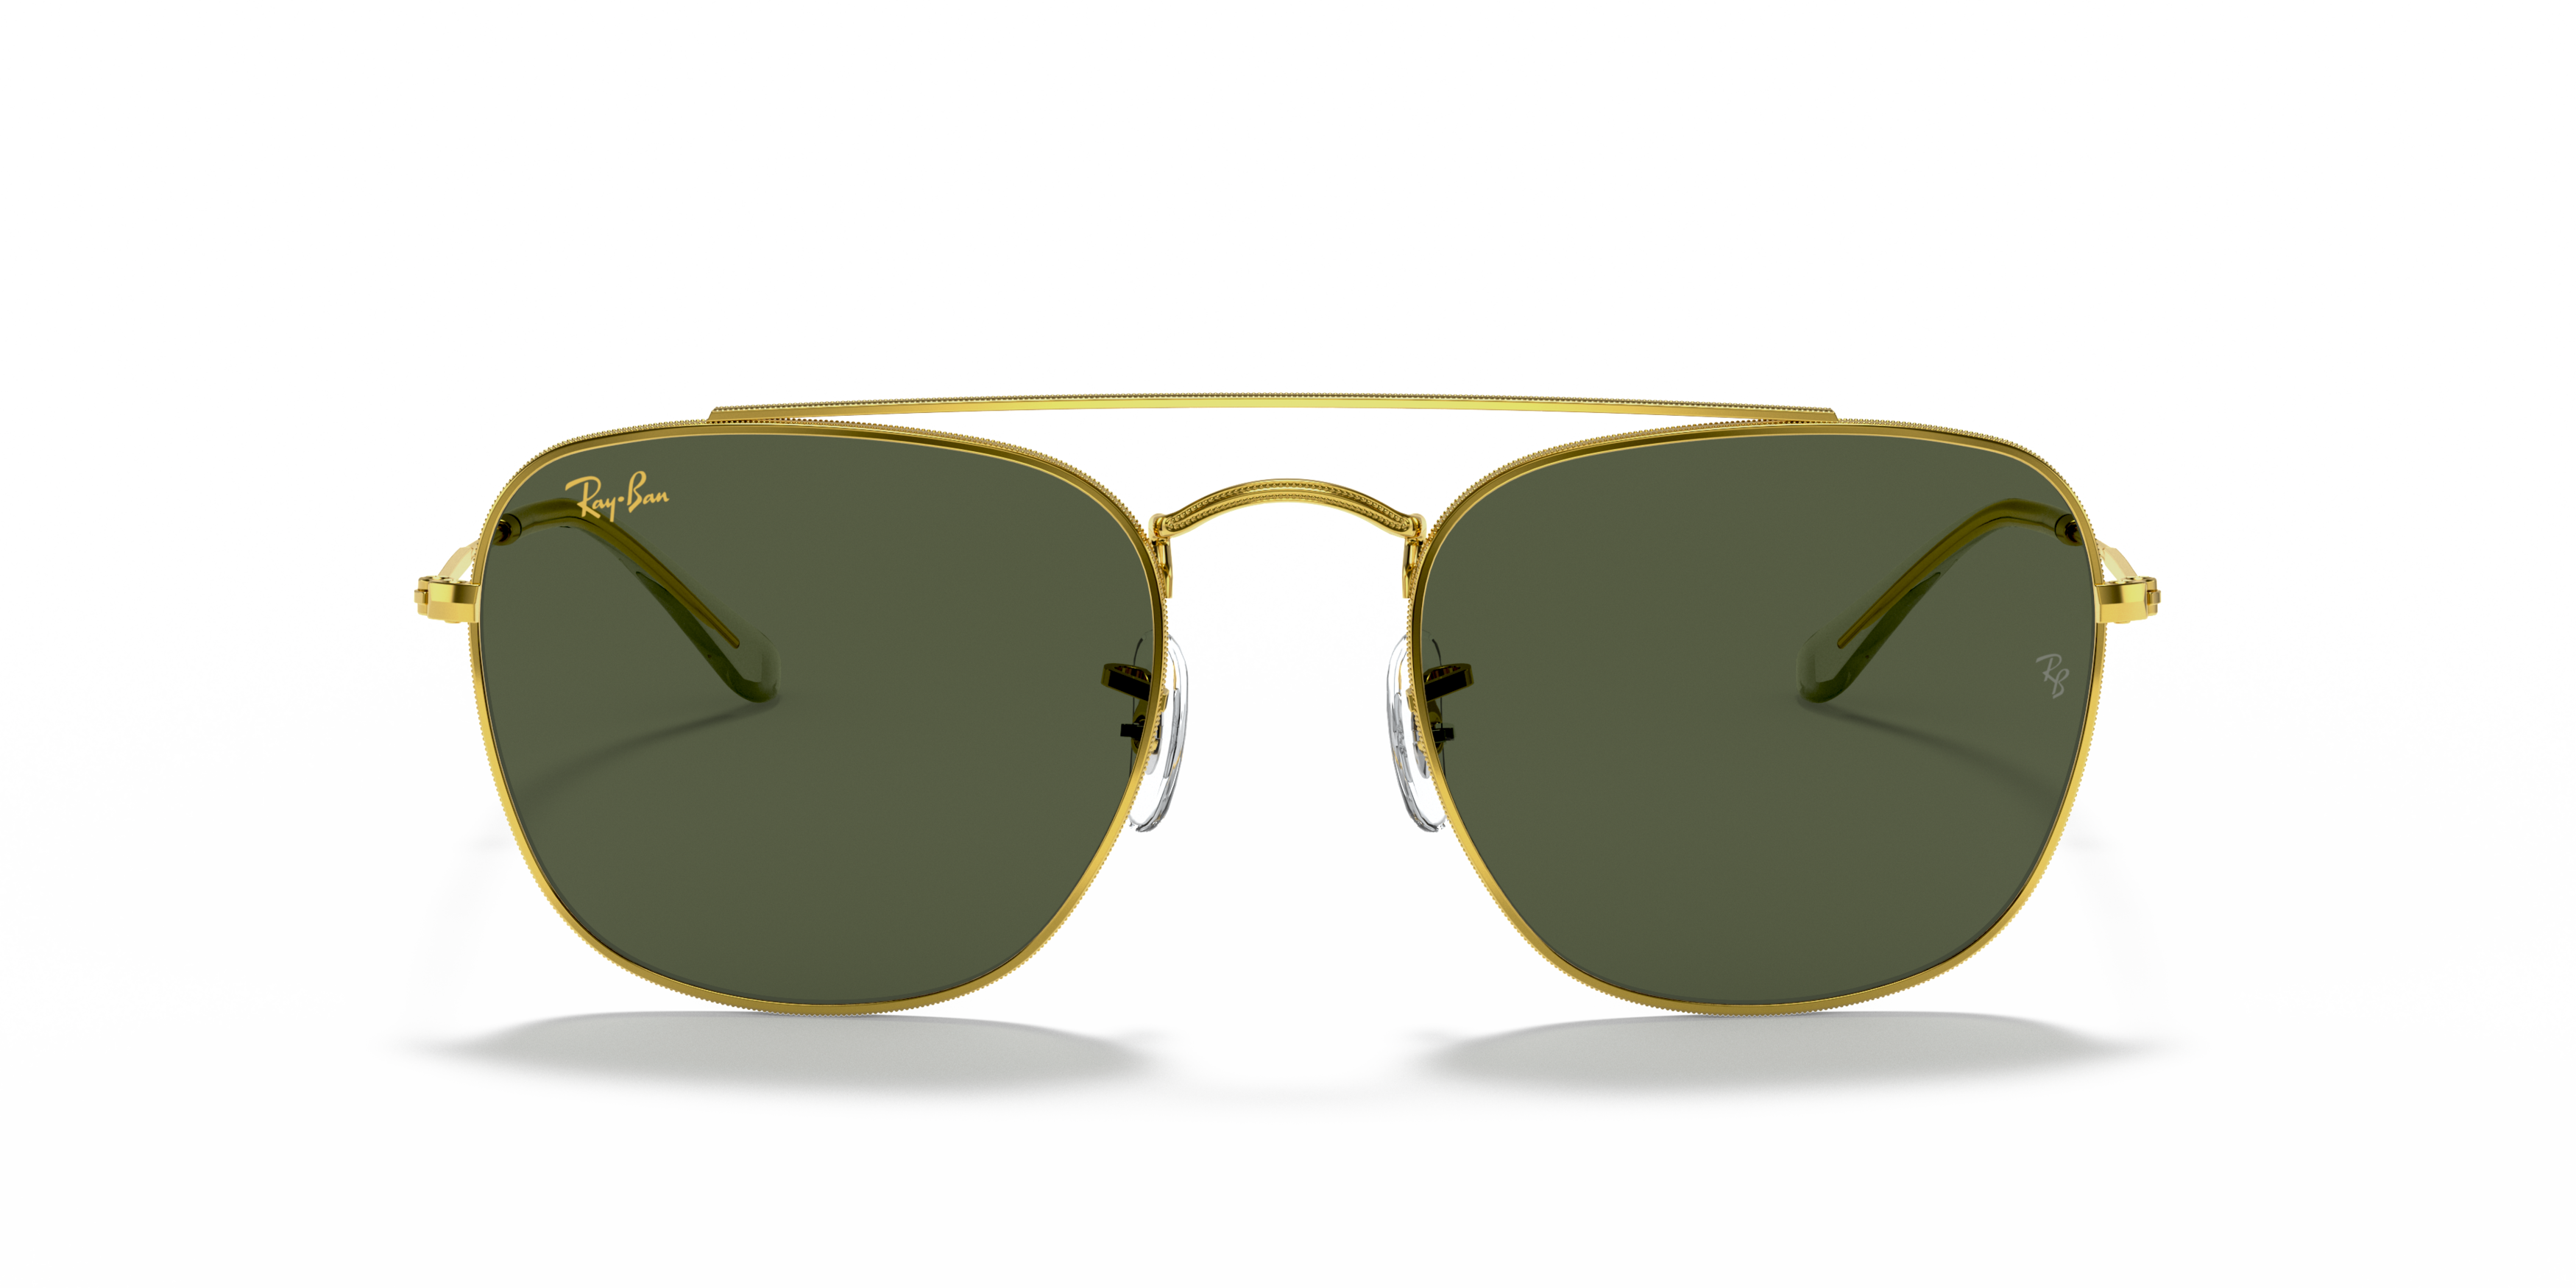 [products.image.front] Ray-Ban Frank RB3557 919631